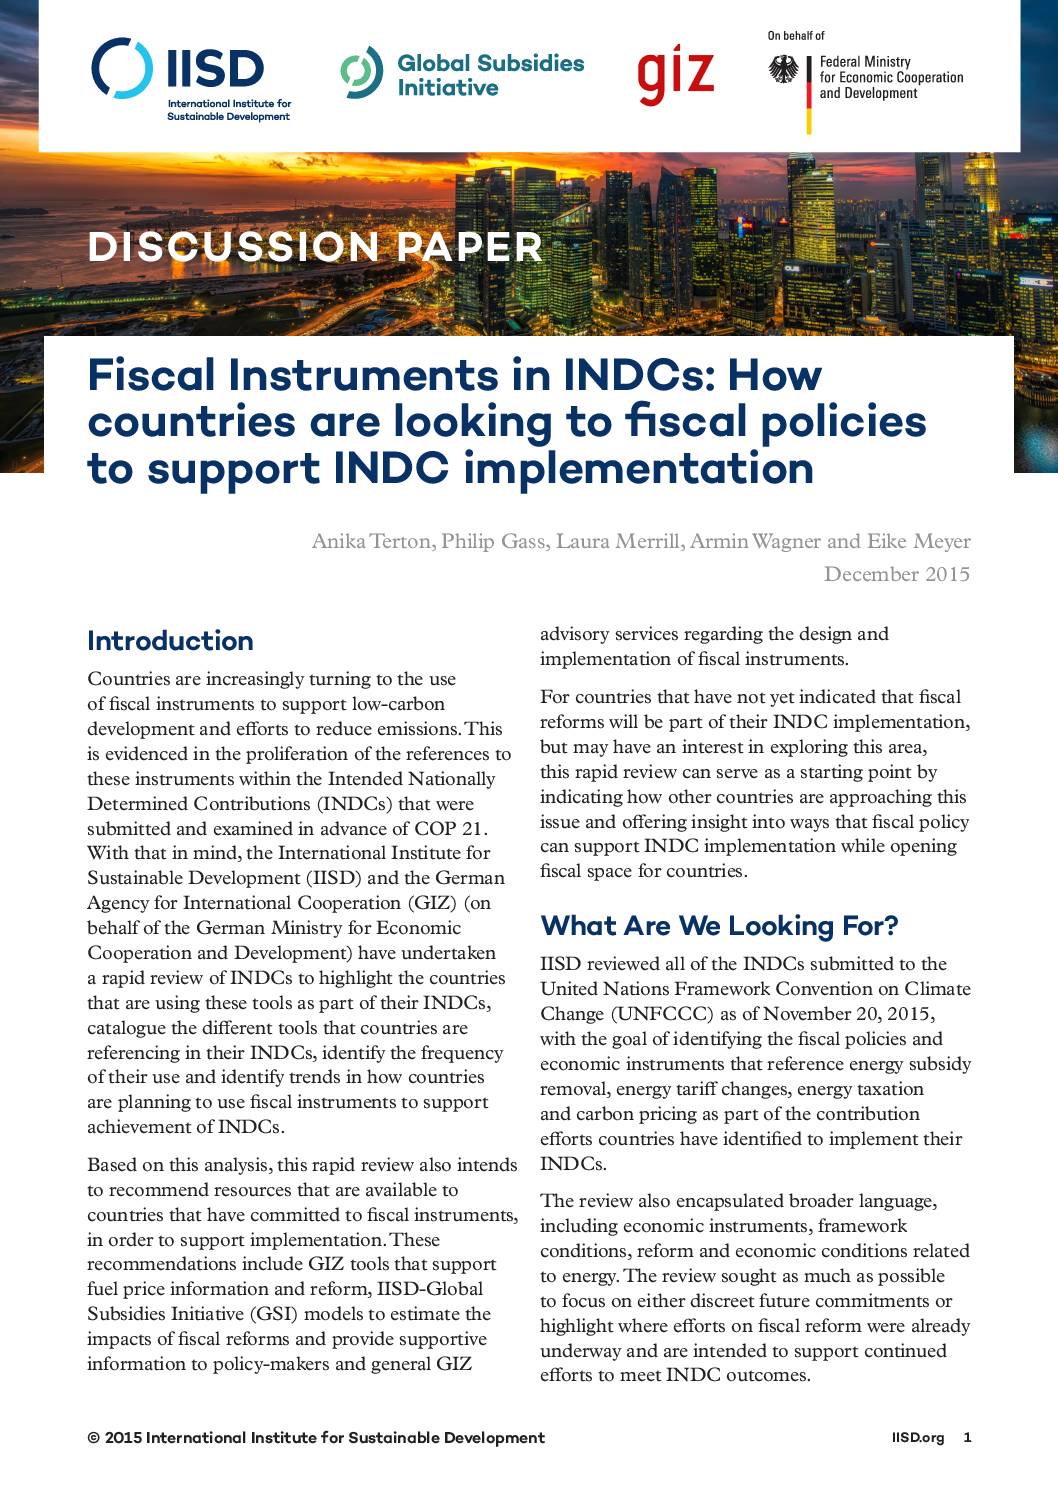 Fiscal Instruments in INDCs: How Countries are Looking to Fiscal Policies to Support INDC Implementation